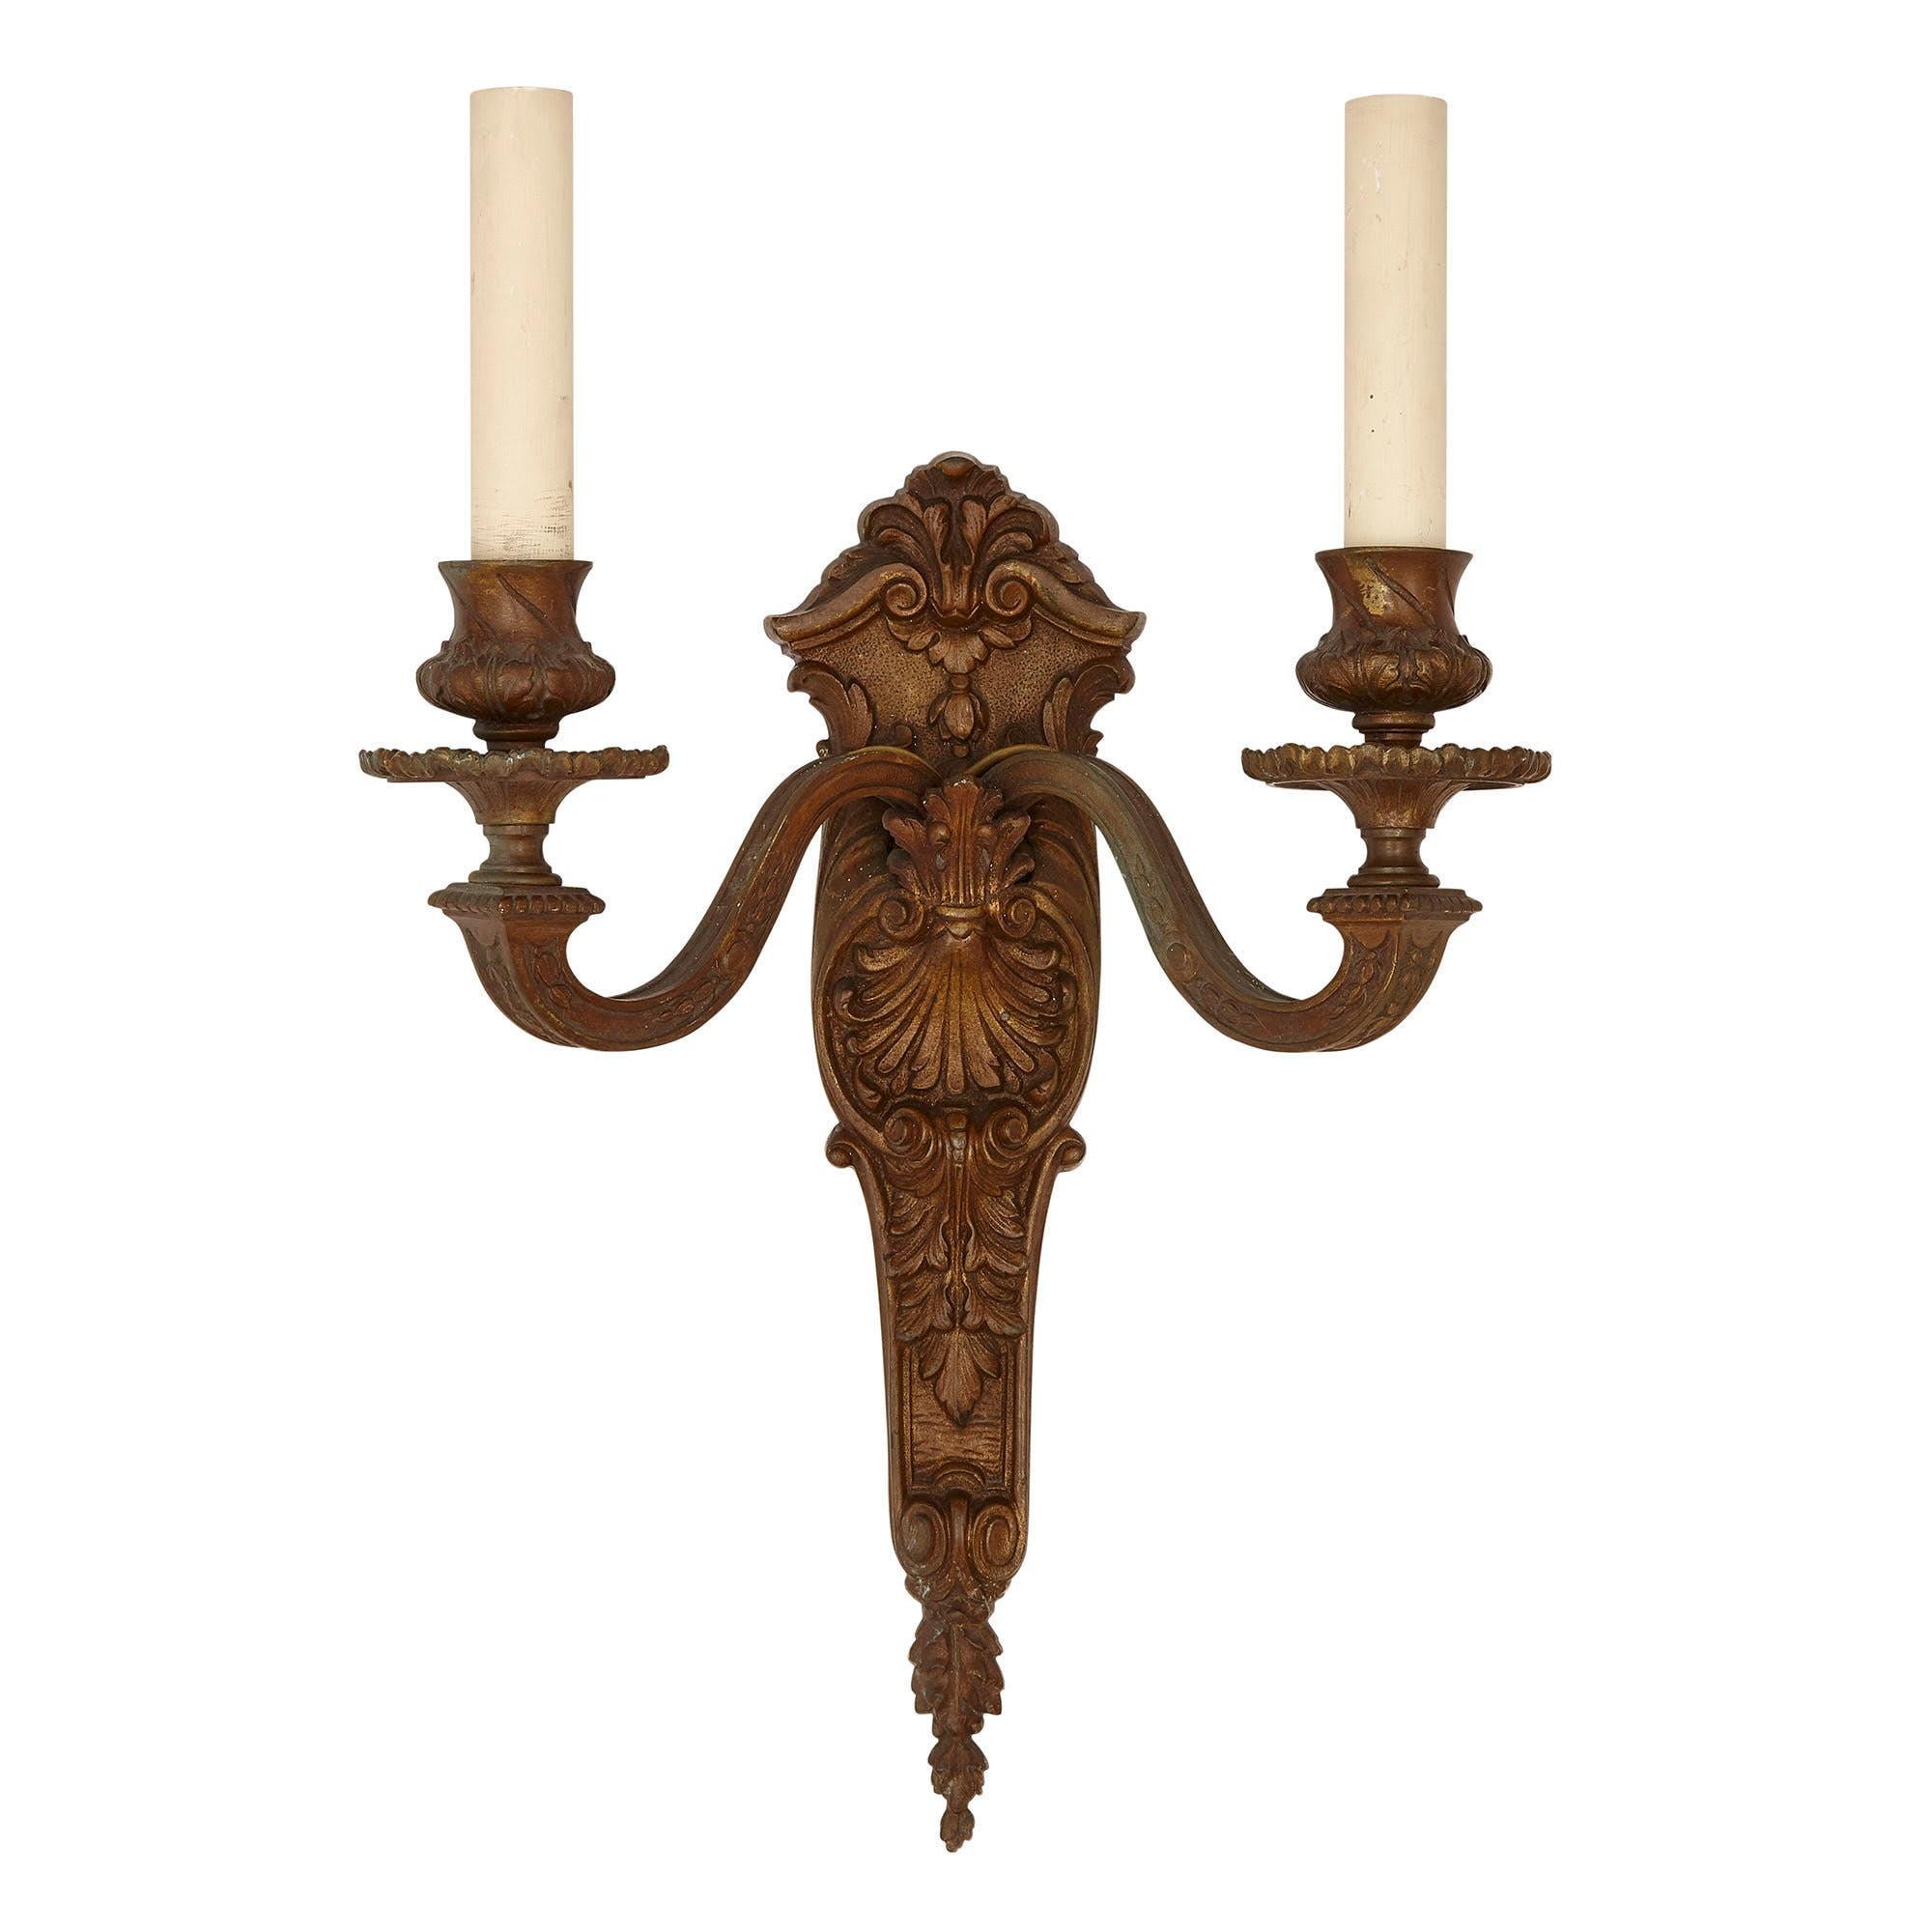 Pair of metal sconces designed in the neoclassical style
French, early 20th Century
Measures: Height 37cm, width 29cm, depth 15cm

This fine pair of sconces is crafted in the neoclassical style from metal. Each sconce features a backplate